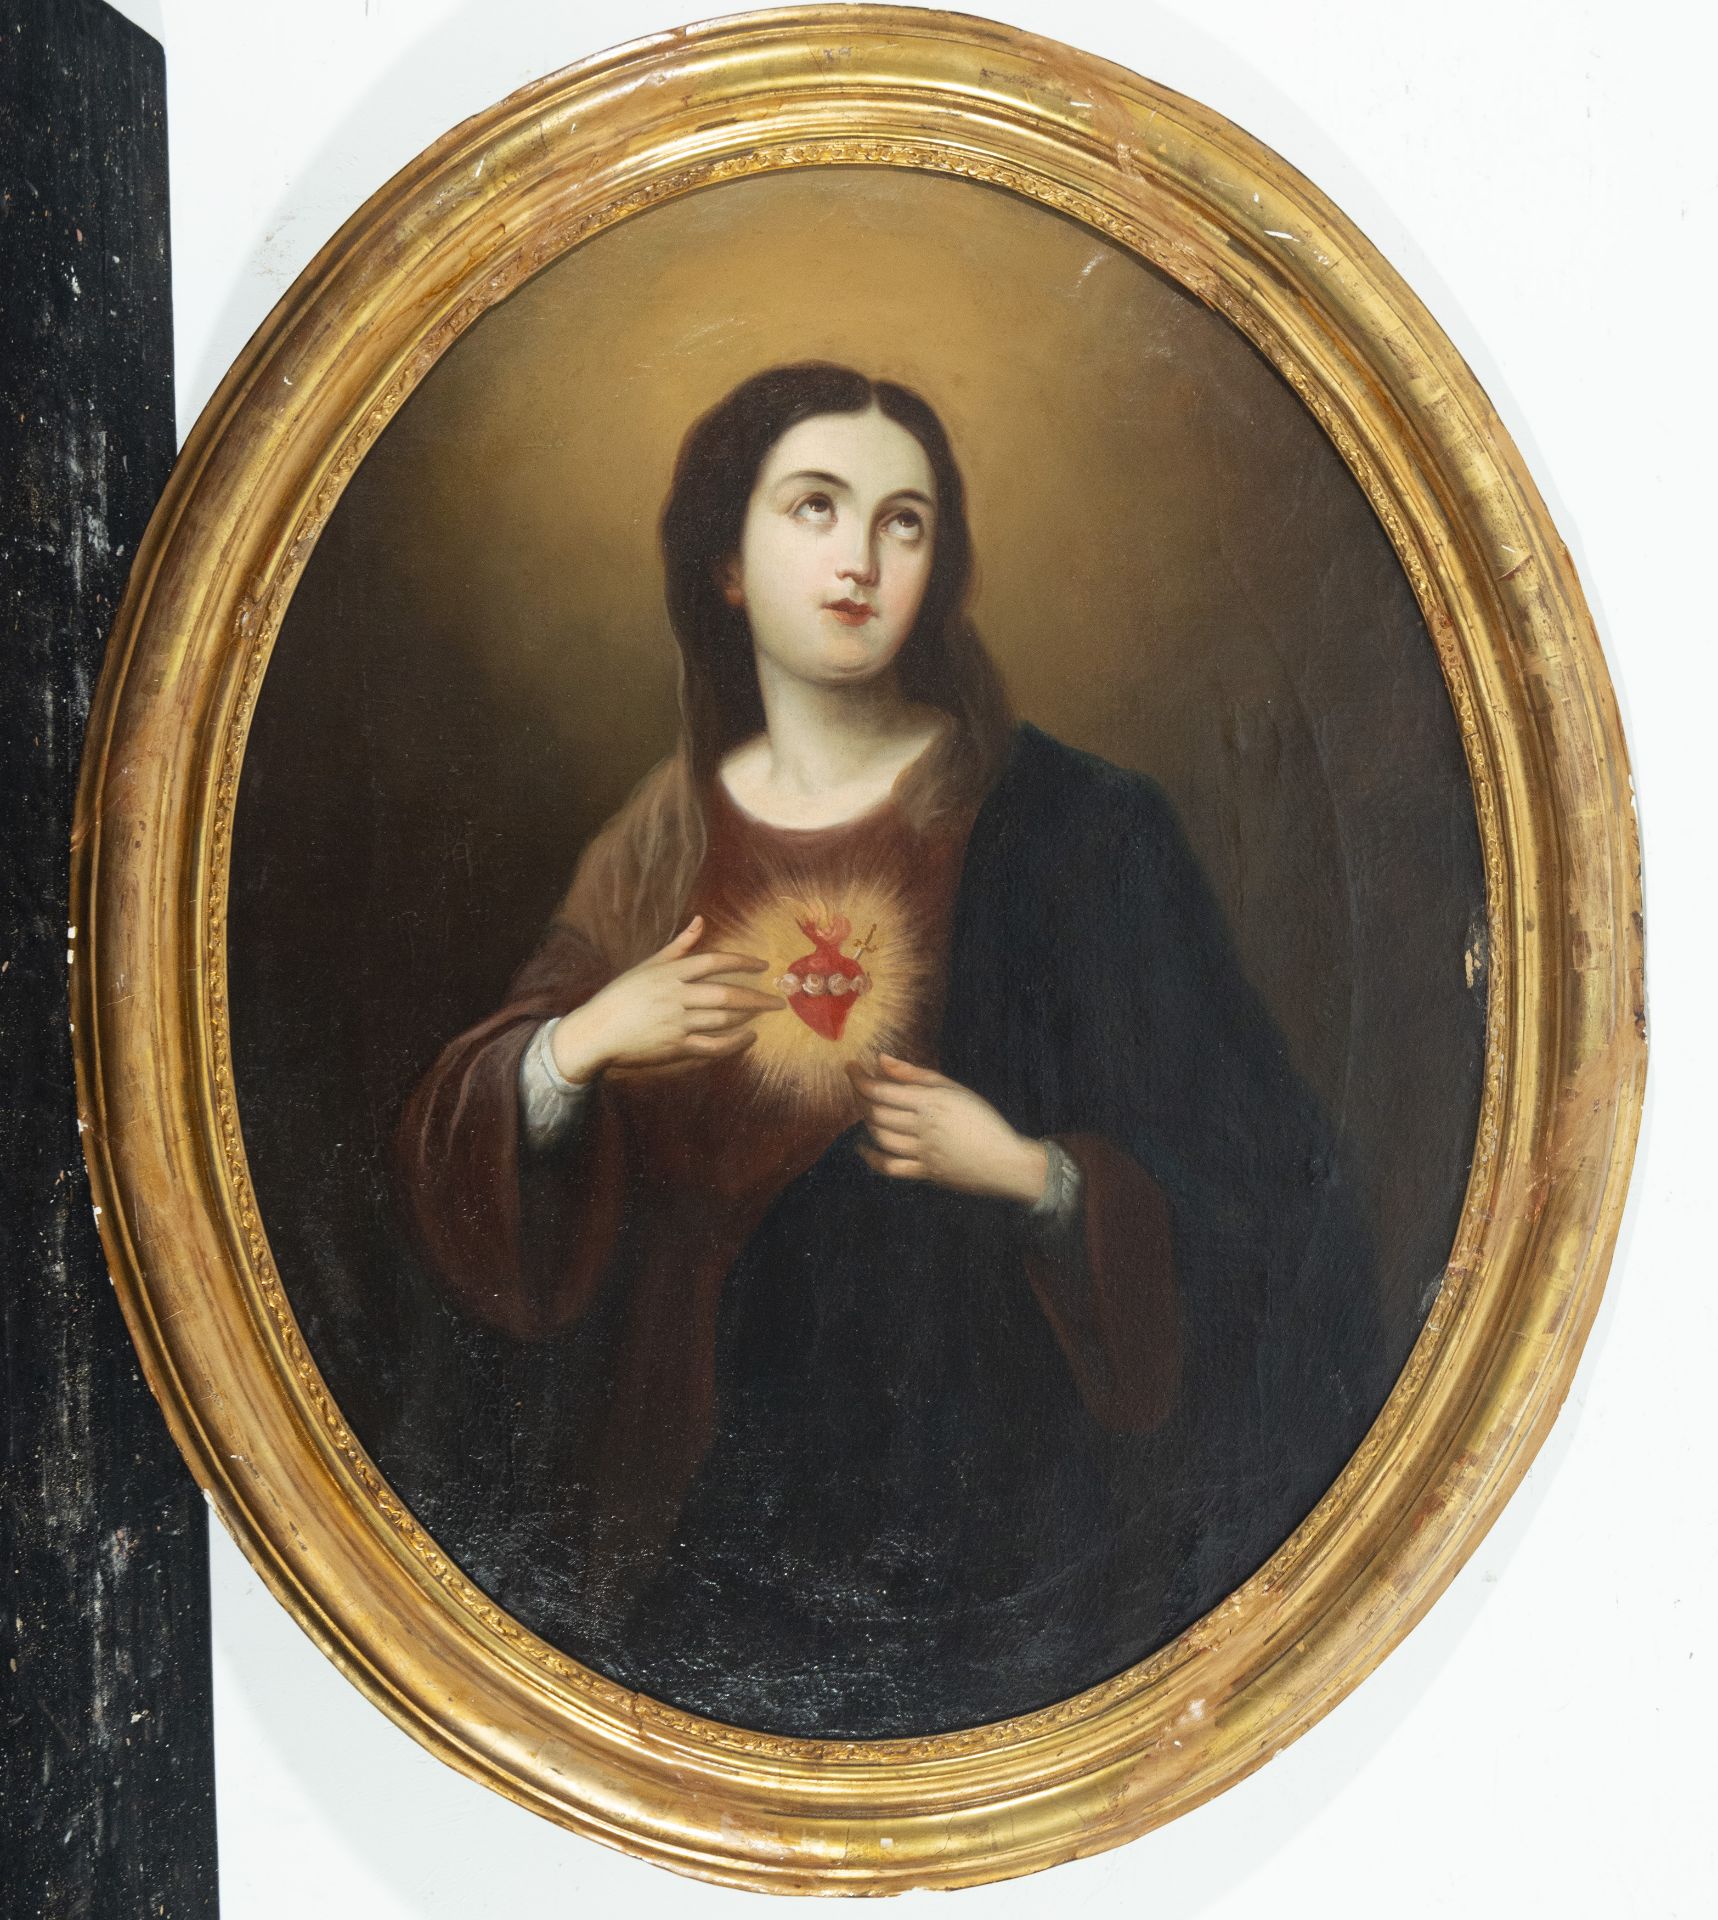 Virgin in Oval from the 19th century